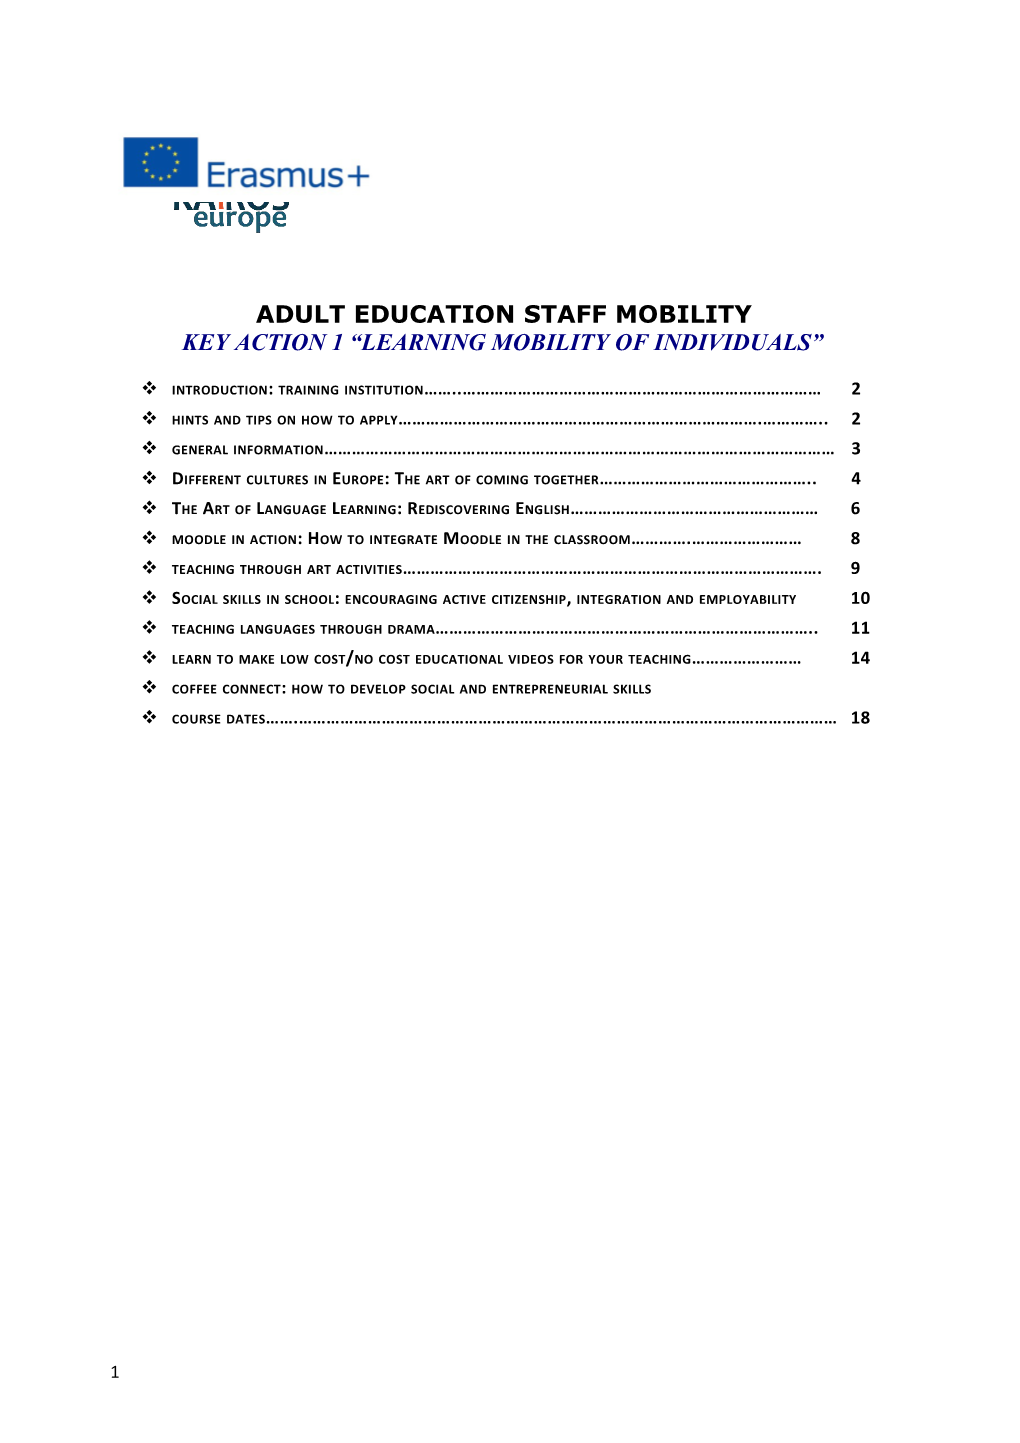 Adult Education Staff Mobility